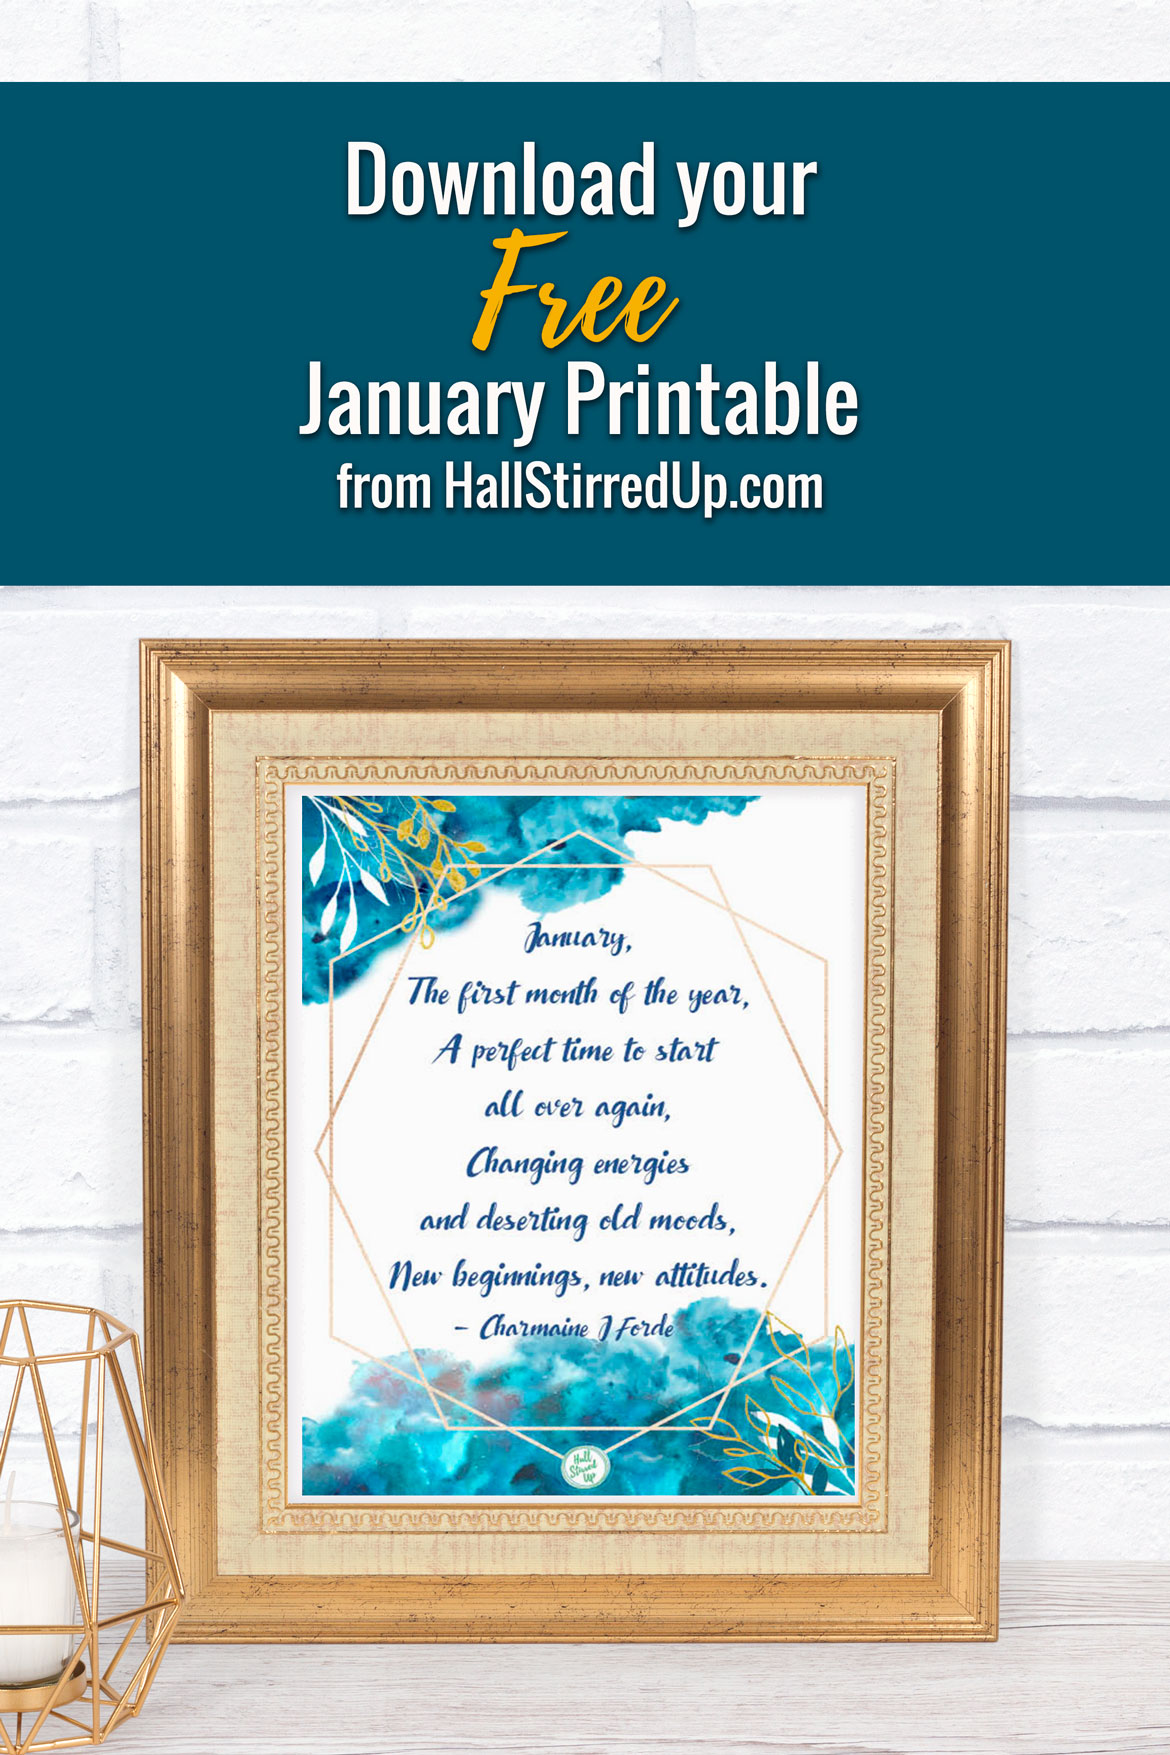 January is here and so is a new quote printable